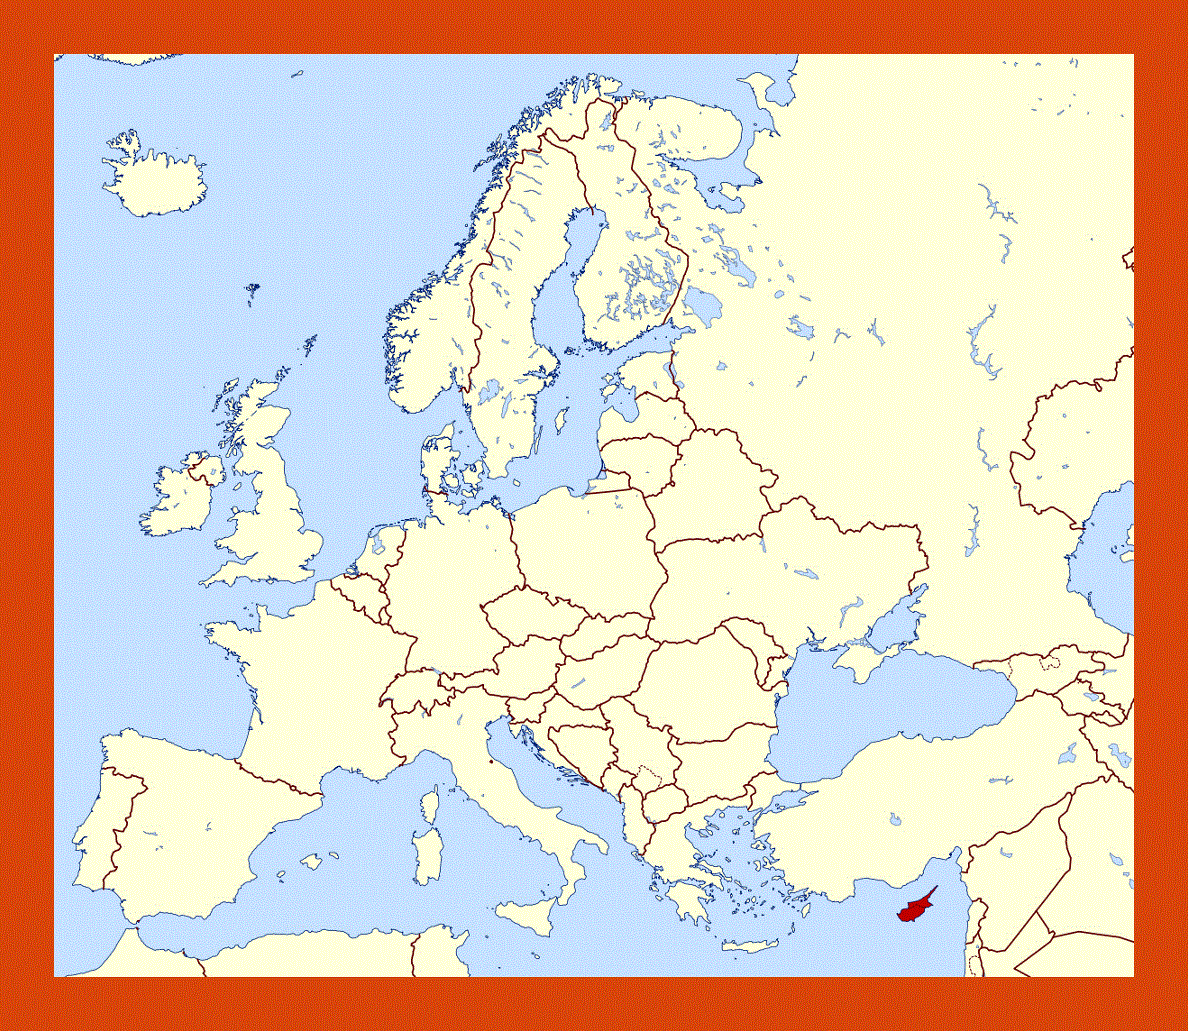 Location map of Cyprus